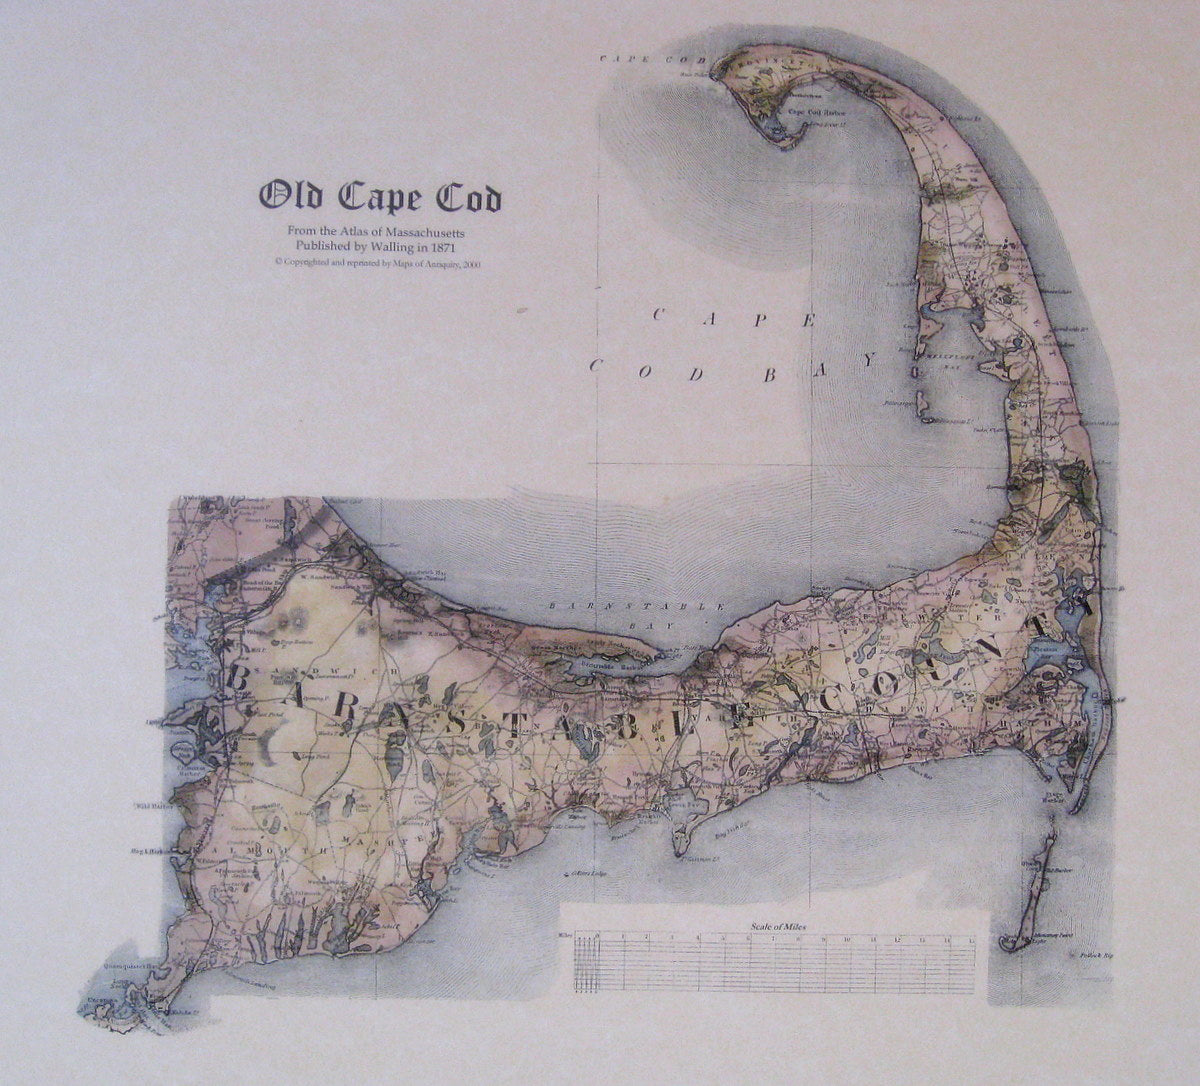 Hand-Colored-Reproduction-Old-Cape-Cod---Hand-Colored-Reproduction-Reproductions-Cape-Cod-and-Islands-Hand-Colored-Reproduction-Walling-and-Gray-Maps-Of-Antiquity